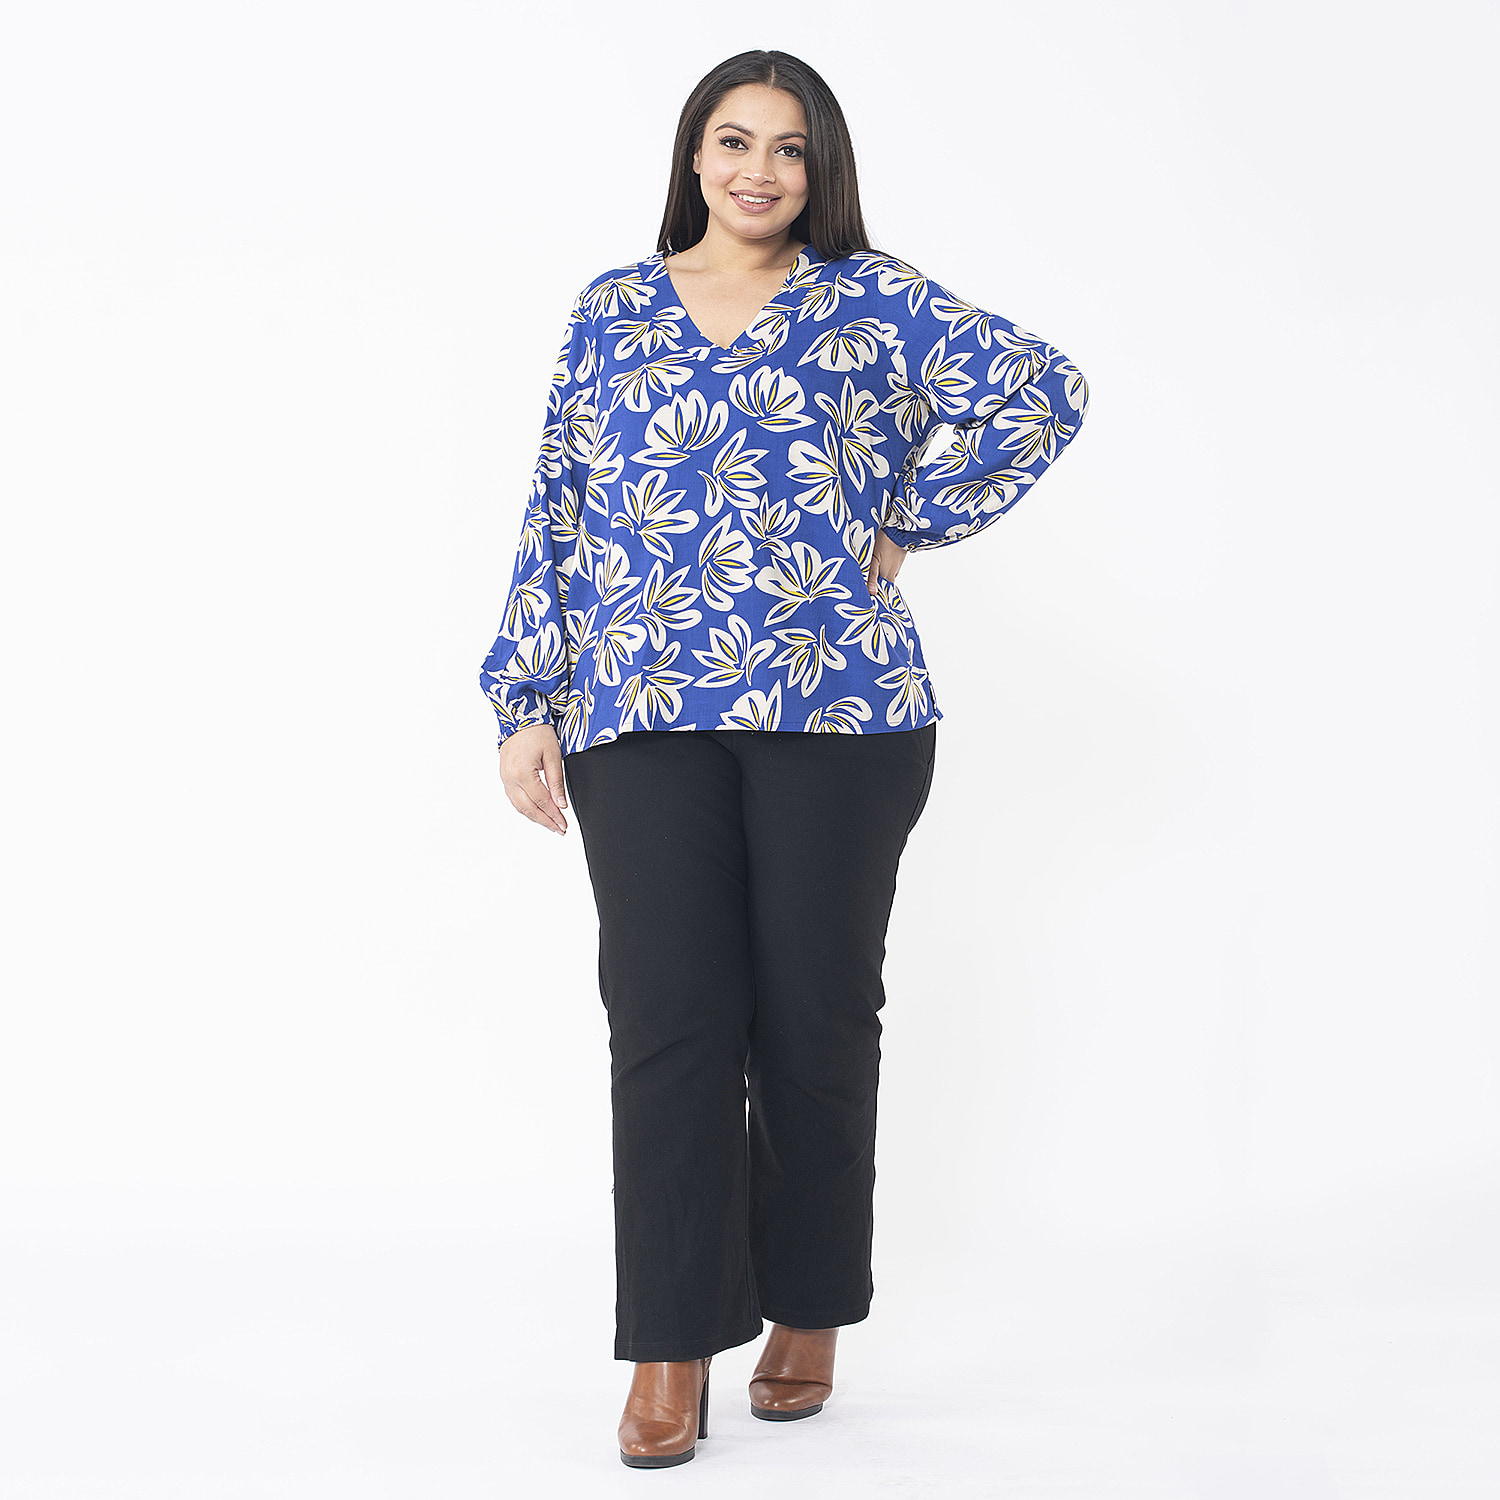 TAMSY 100% Viscose Floral Printed V Neck Full Sleeve Top with Elastic at Cuffs (Size XXL,24-26) - Navy